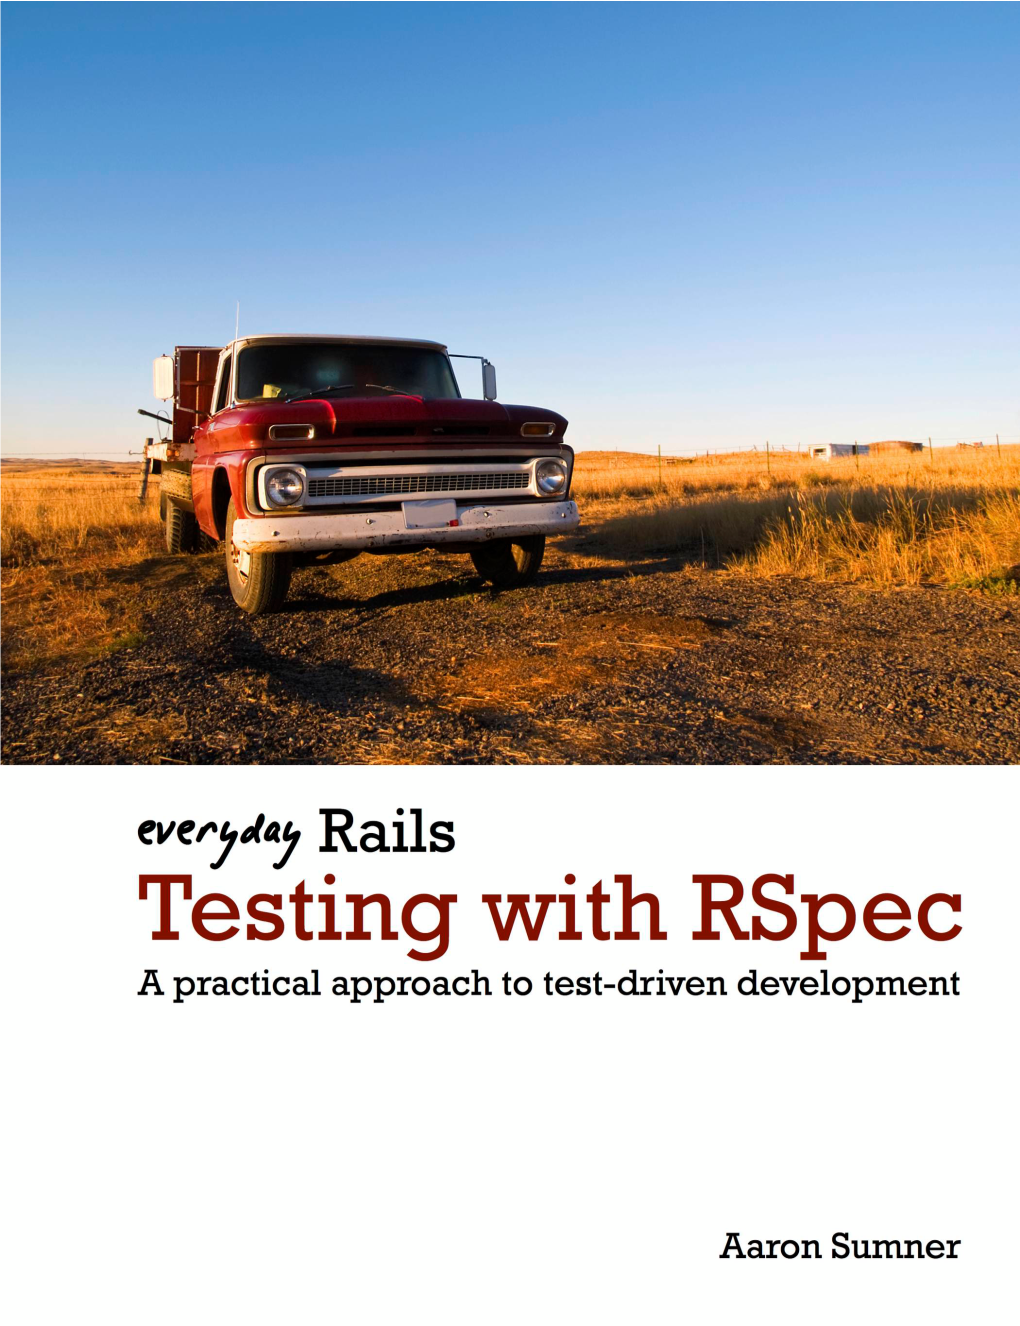 Everyday Rails Testing with Rspec a Practical Approach to Test-Driven Development